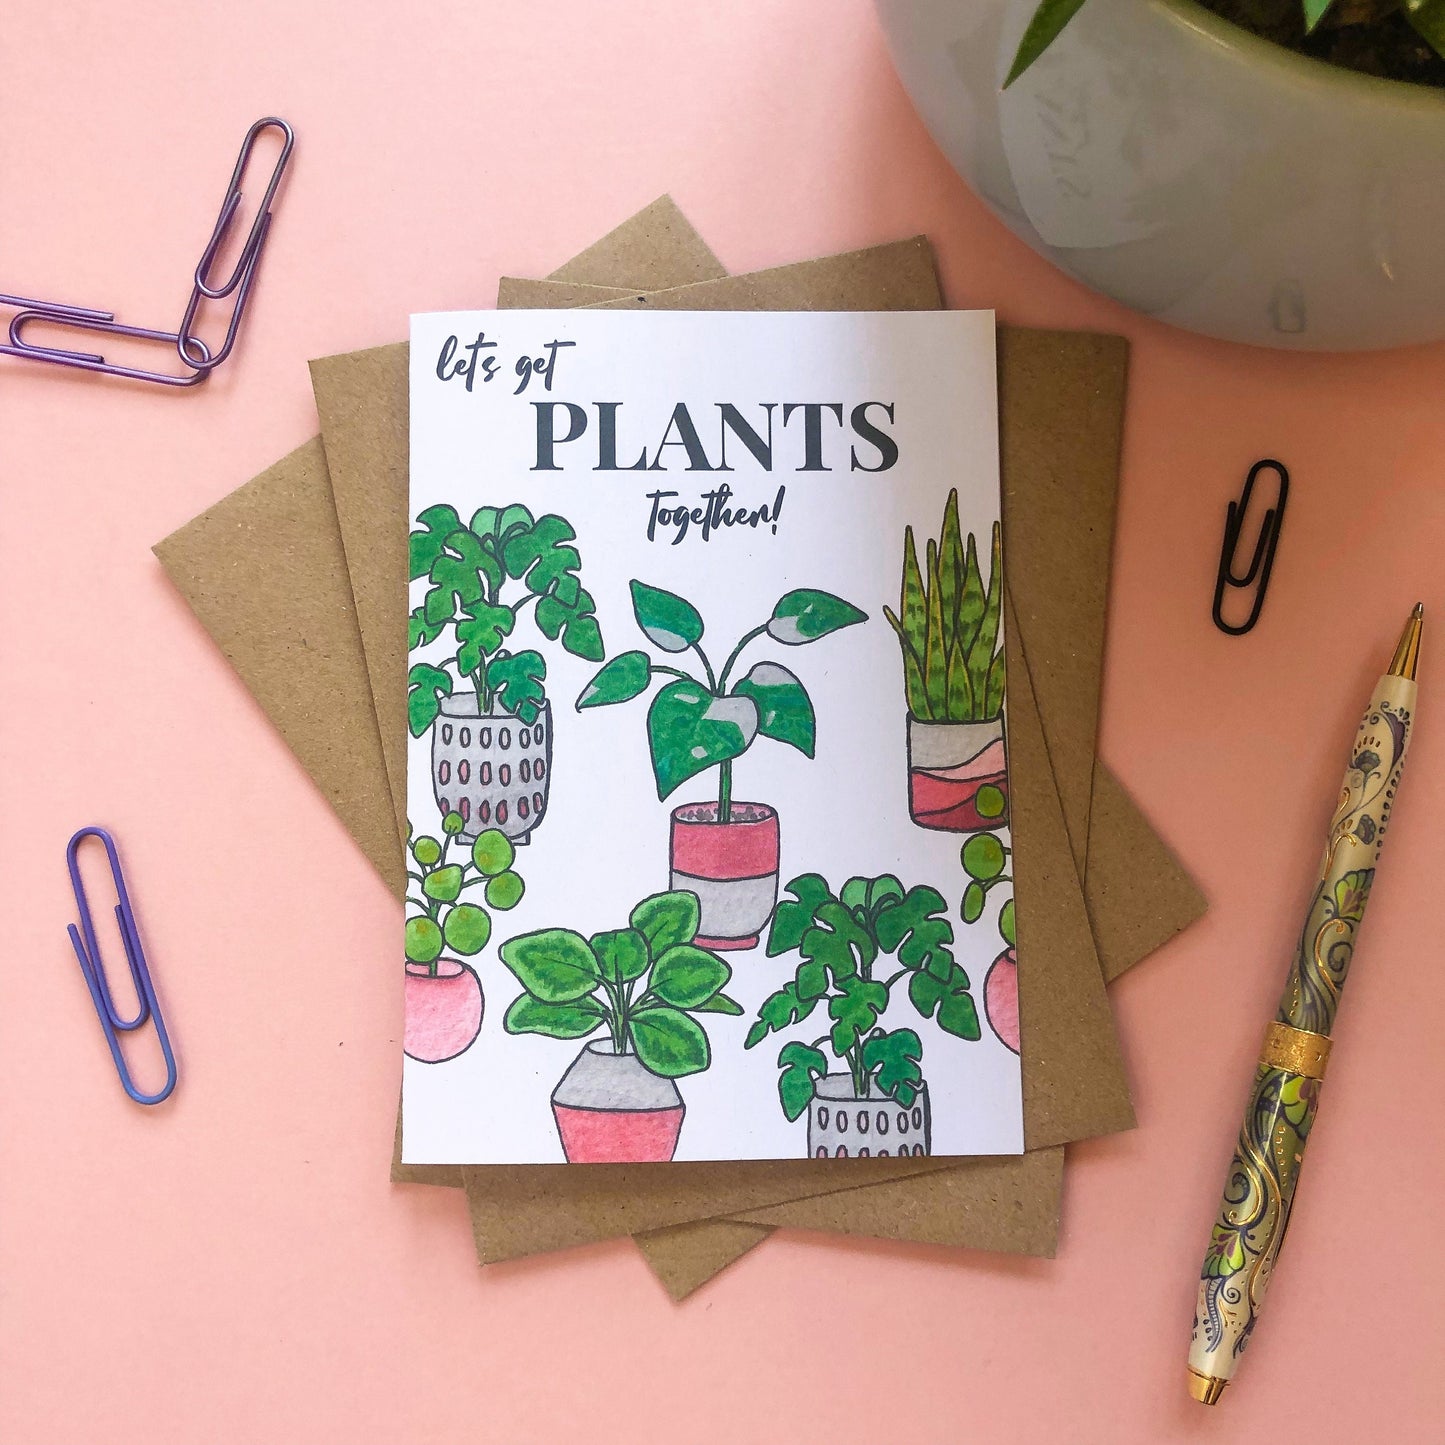 Let's get plants together! Valentines Day, Moving In Card